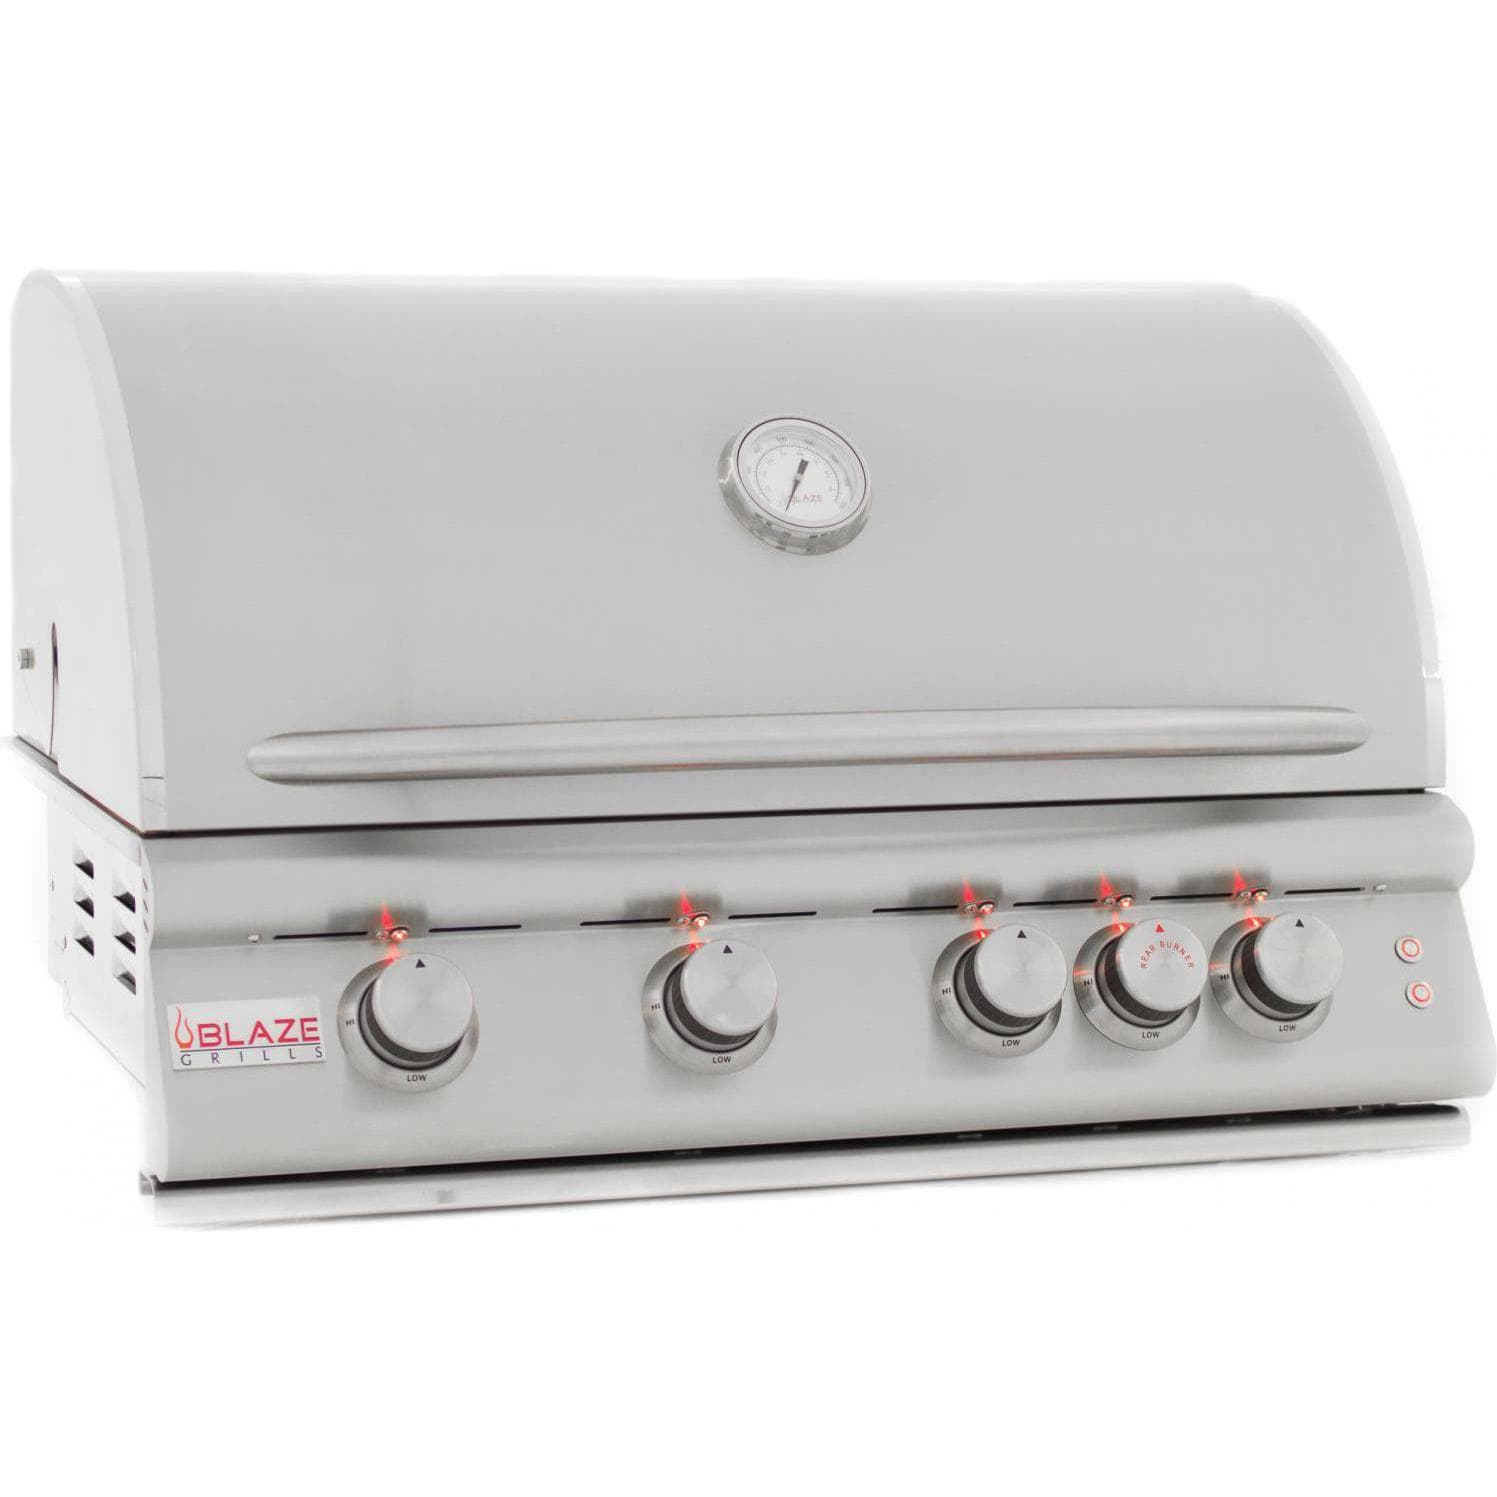 Blaze Premium Gas Grill Blaze Premium LTE 32-Inch 4-Burner |Natural Gas or Propane | Free Standing | Gas Grill With Rear Infrared Burner & Grill Lights - BLZ-4LTE2